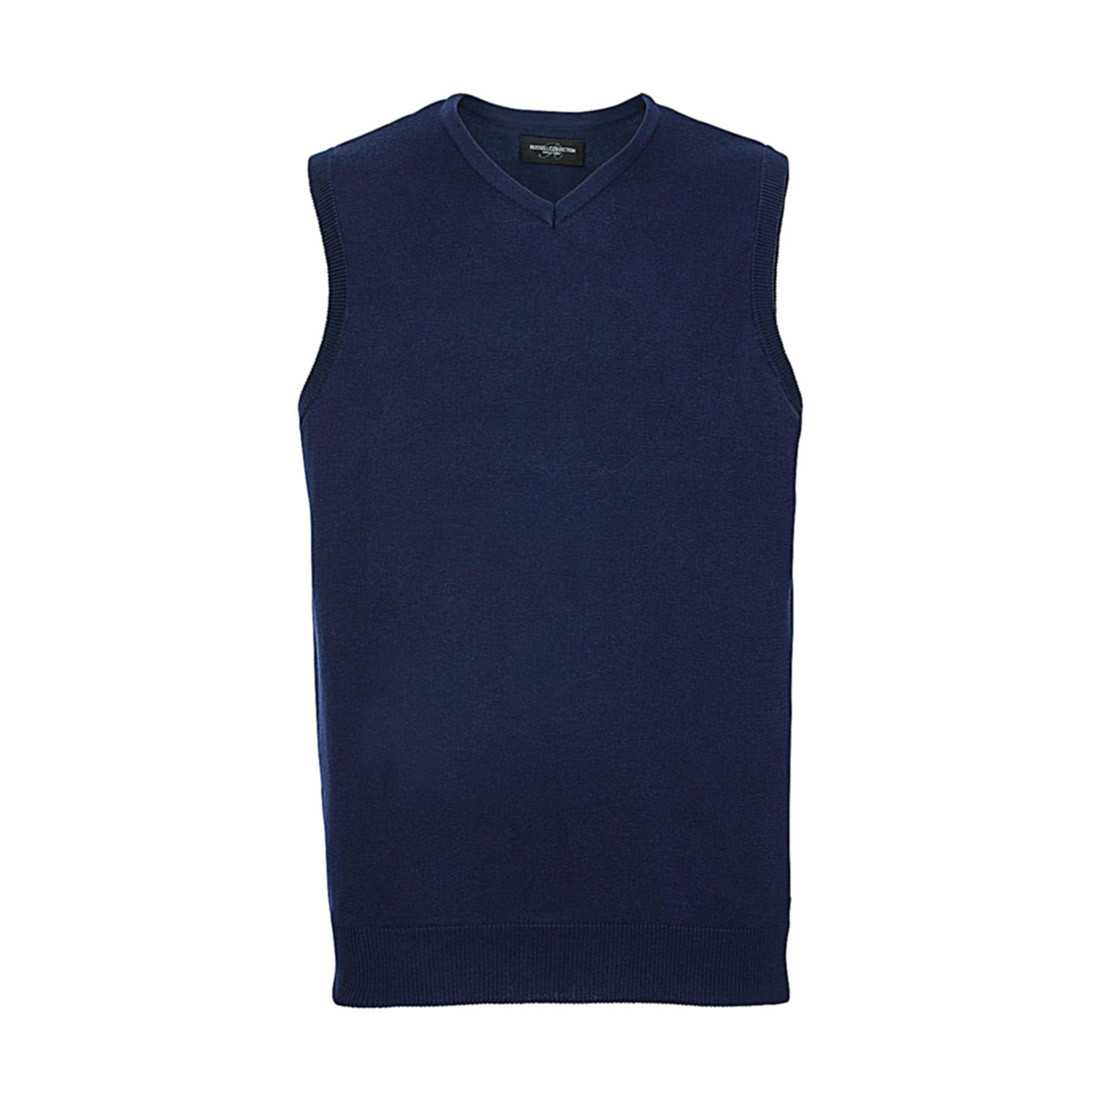 Adults' V-Neck Sleeveless Knitted Pullover - Safetywear